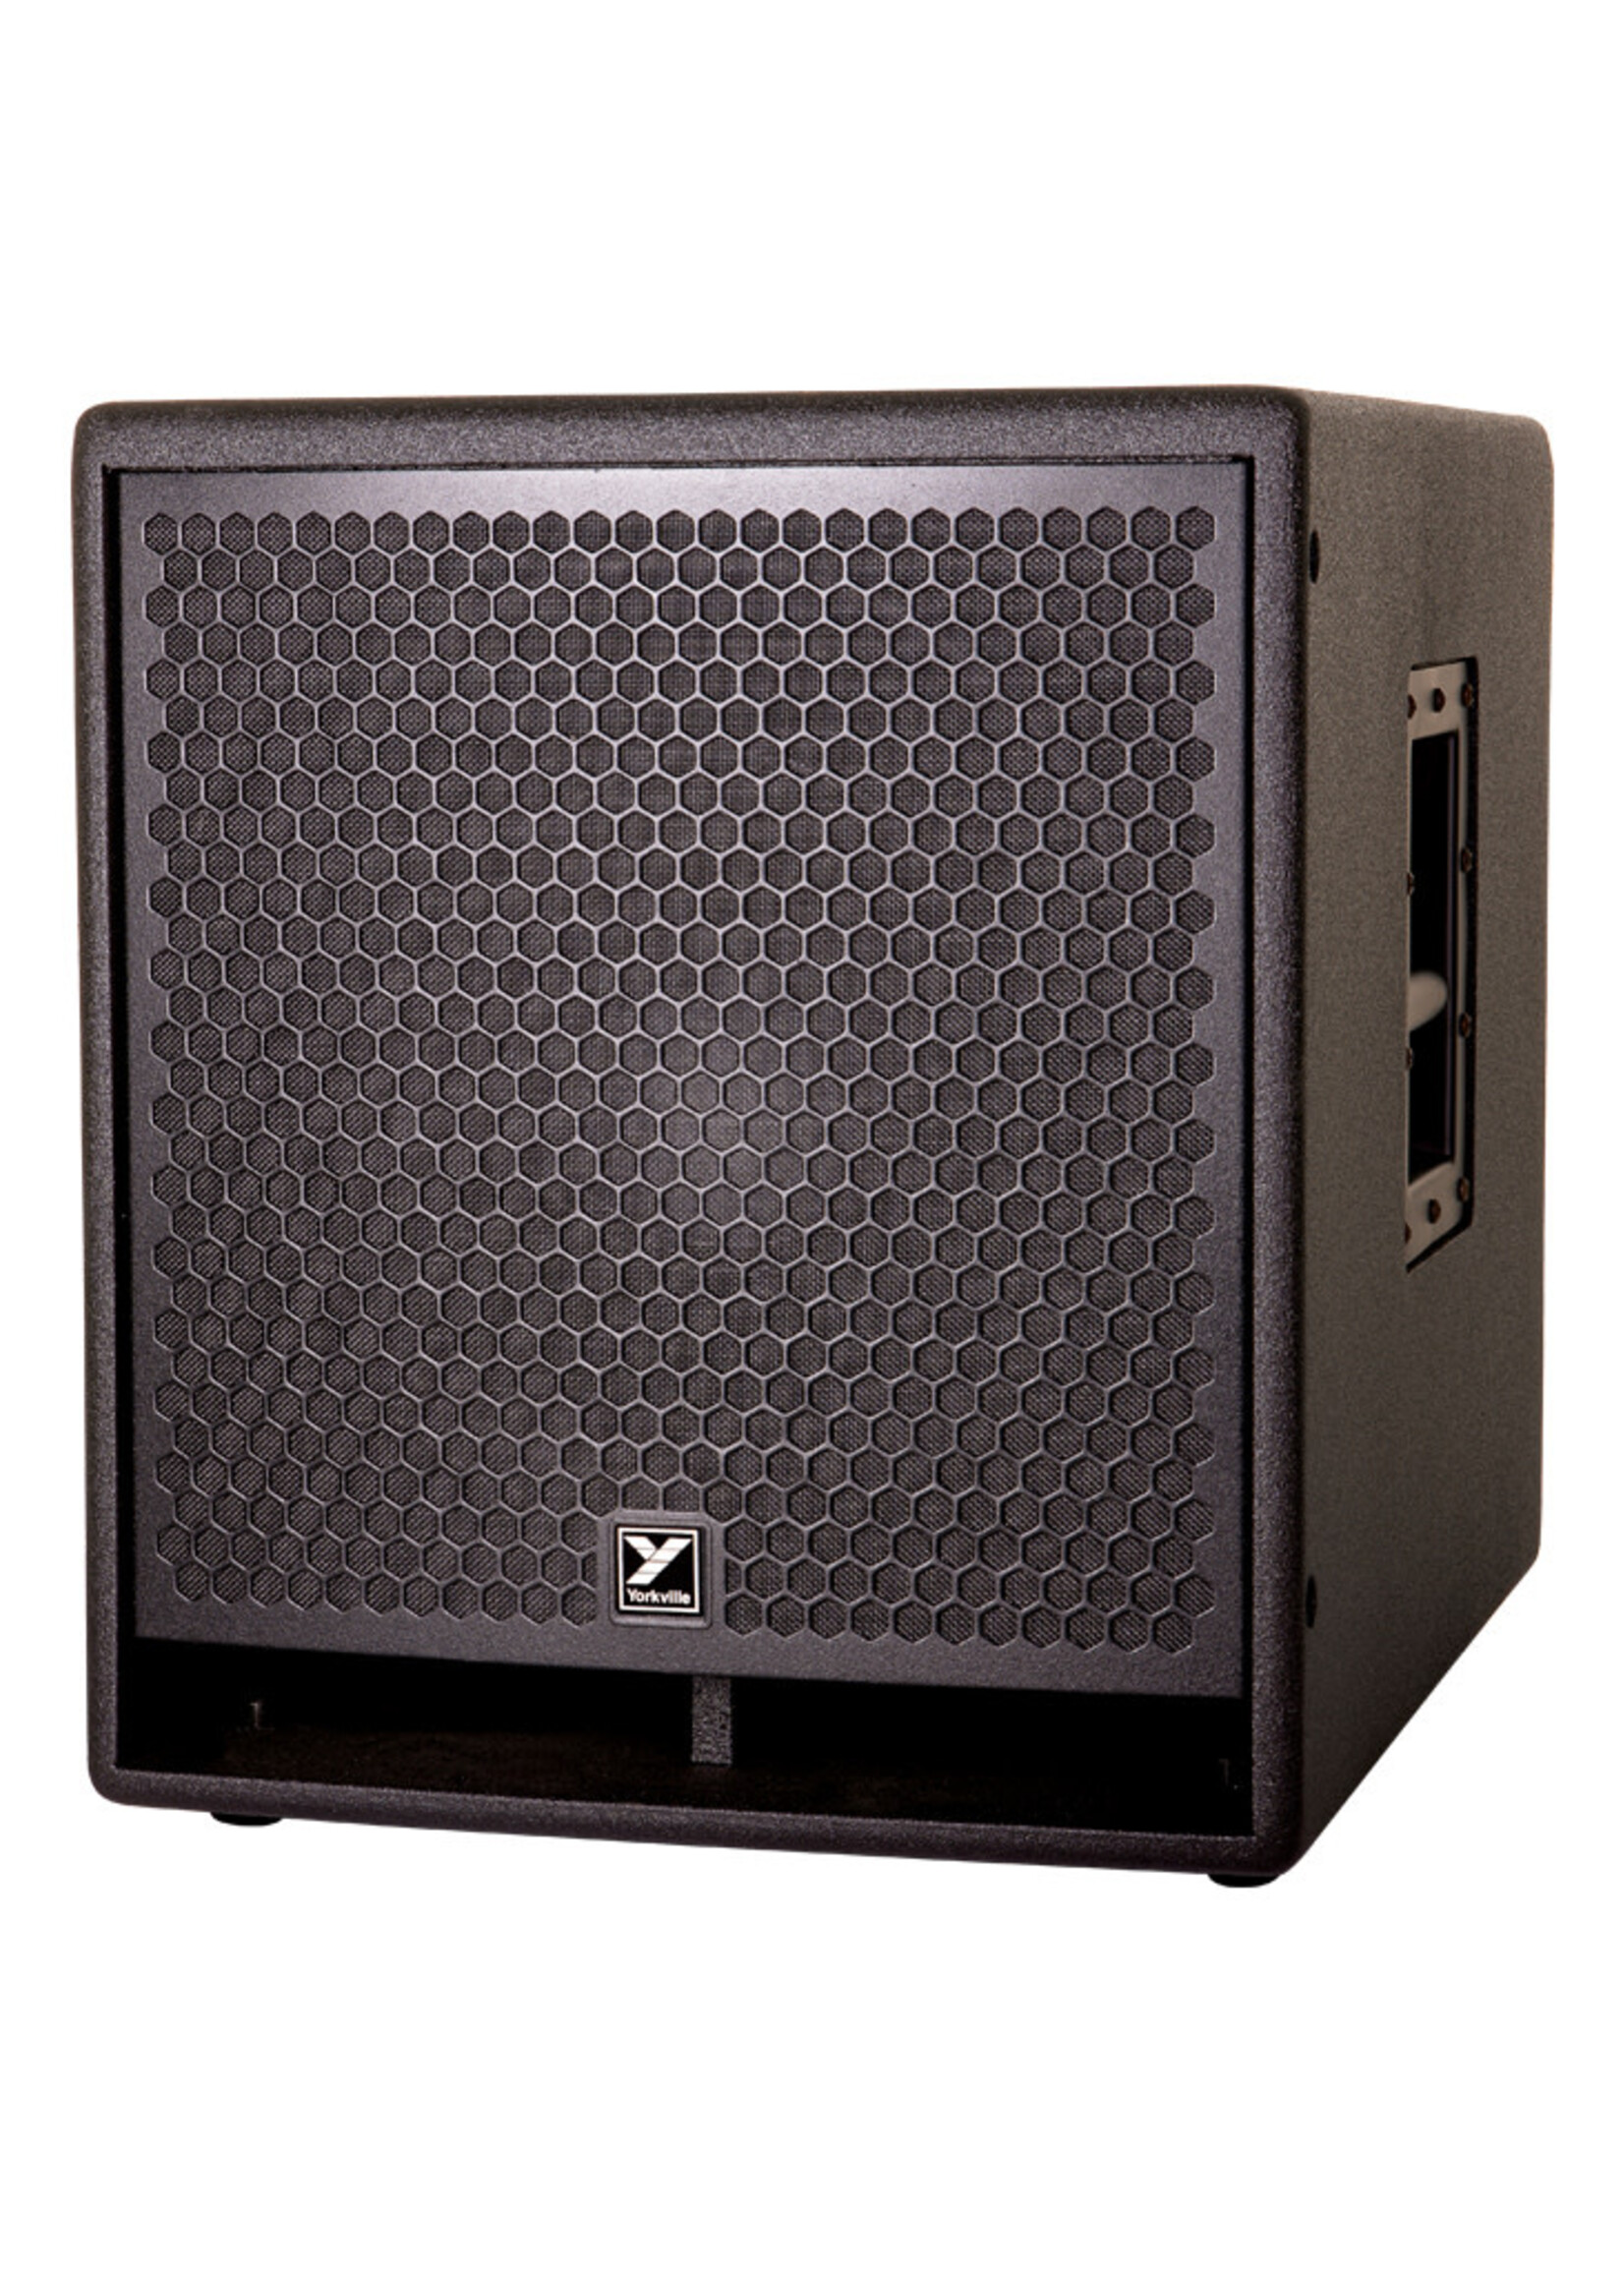 Yorkville Yorkville Sound PS15S 15" Parasource Powered Subwoofer